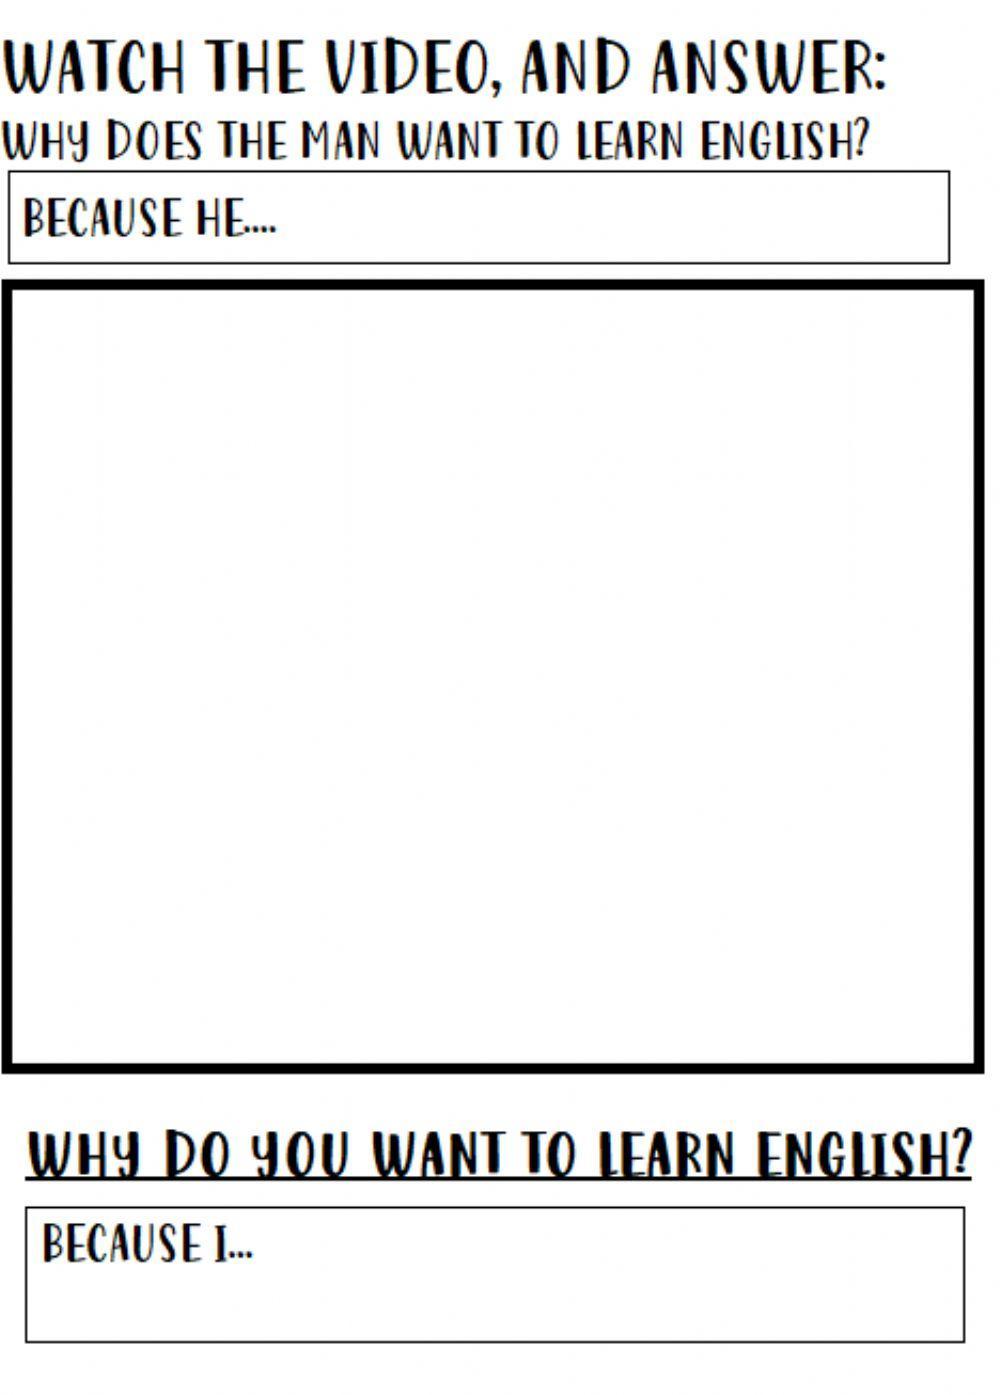 Why do you want to learn english?